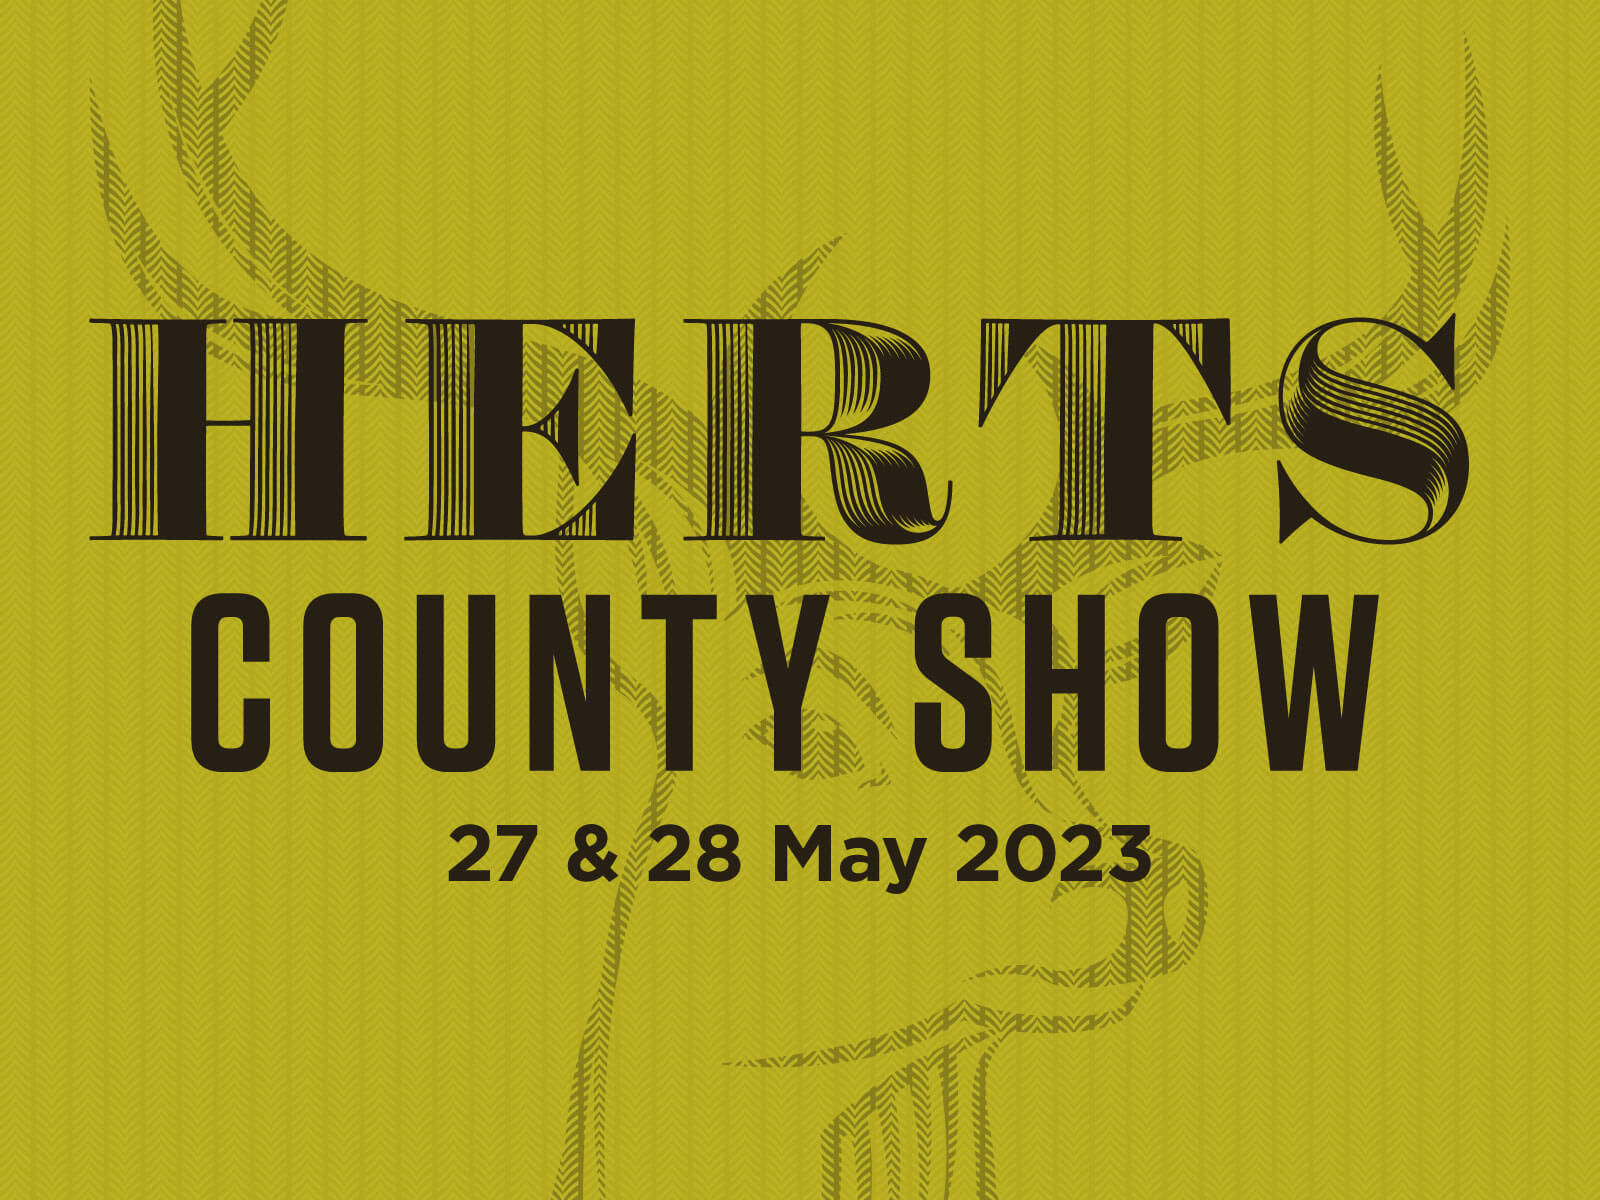 Herts County Show 2023